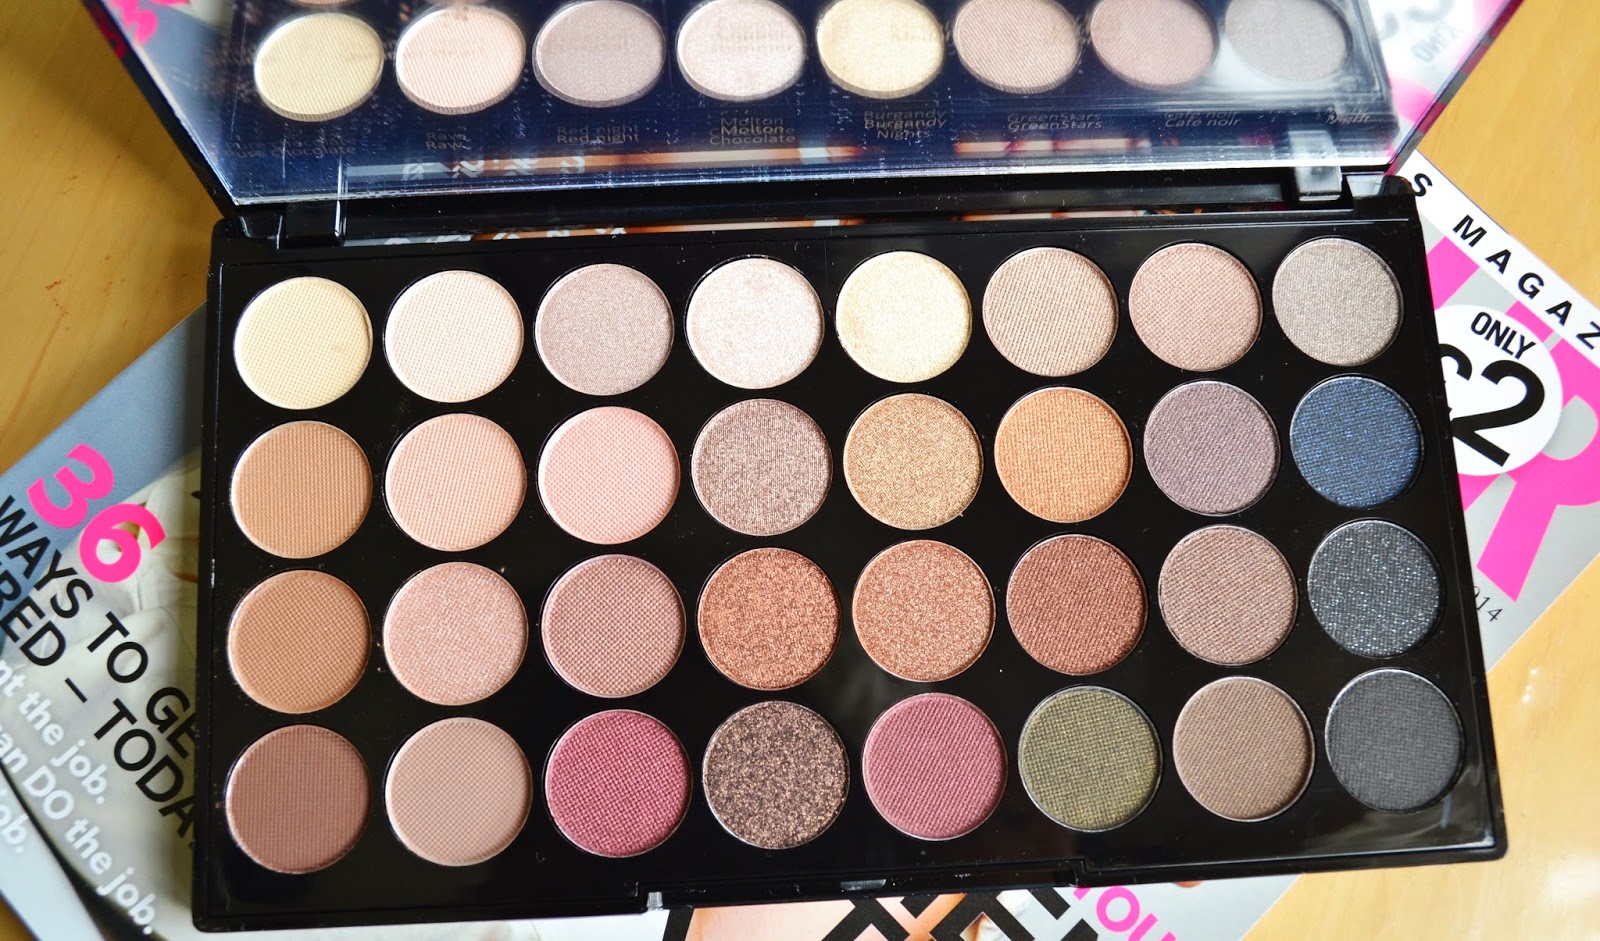 Review Makeup Revolution Ultra 32 Eyeshadow Palette in